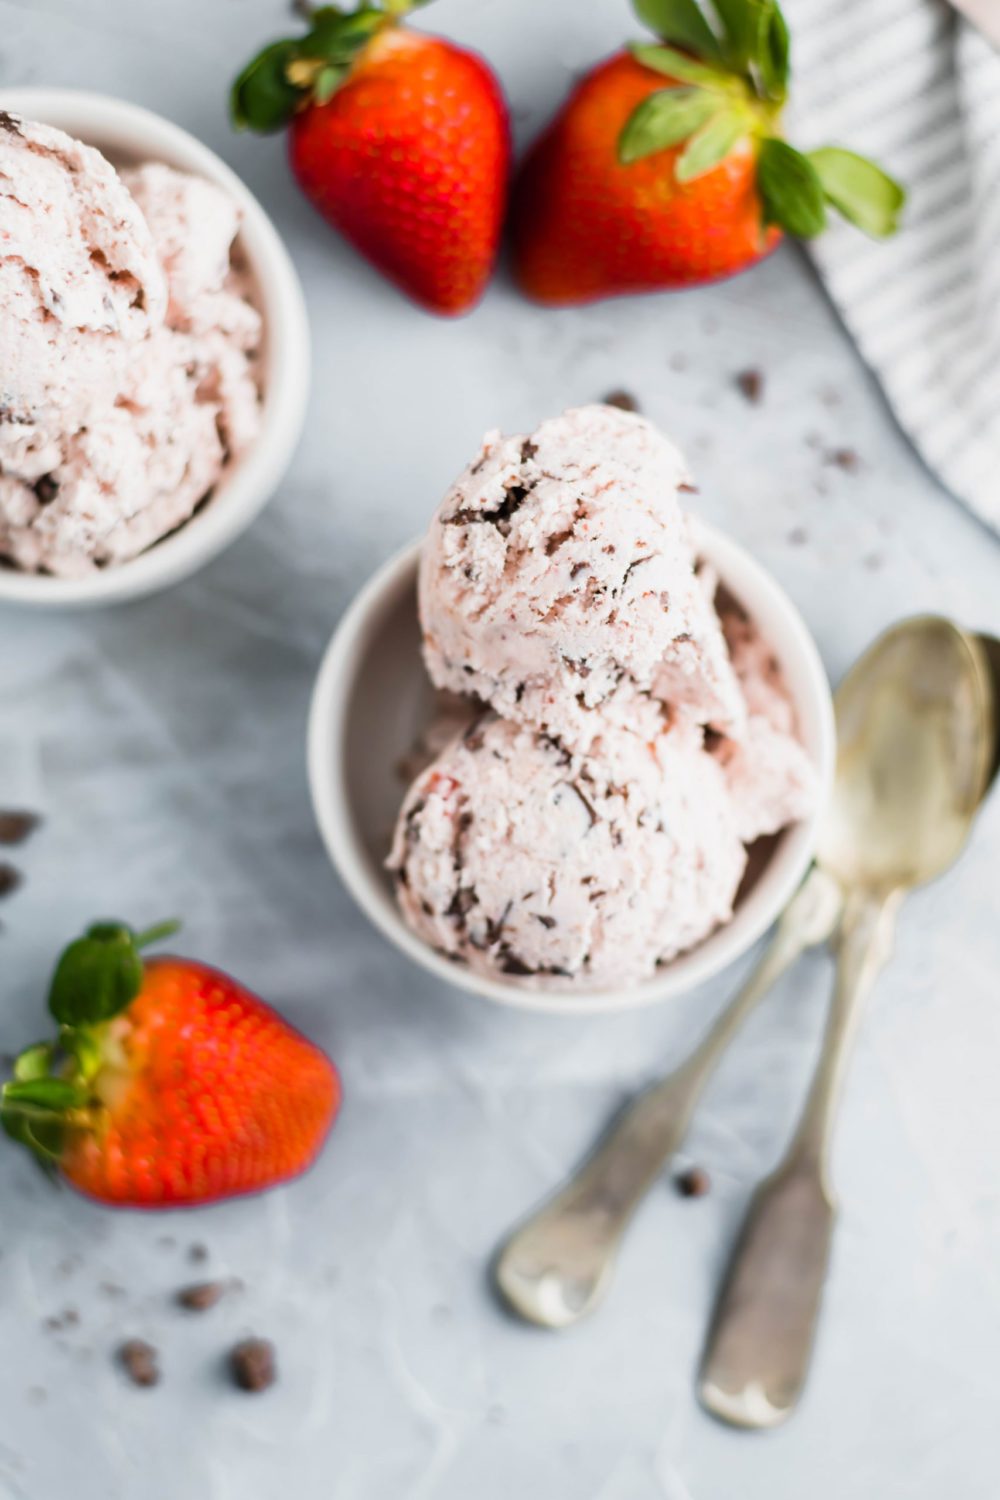 Strawberry Chocolate Chip Ice Cream is sweet, creamy perfection. A delicious, pretty pink dessert for Valentine's day. A tasty treat for all summer long too.